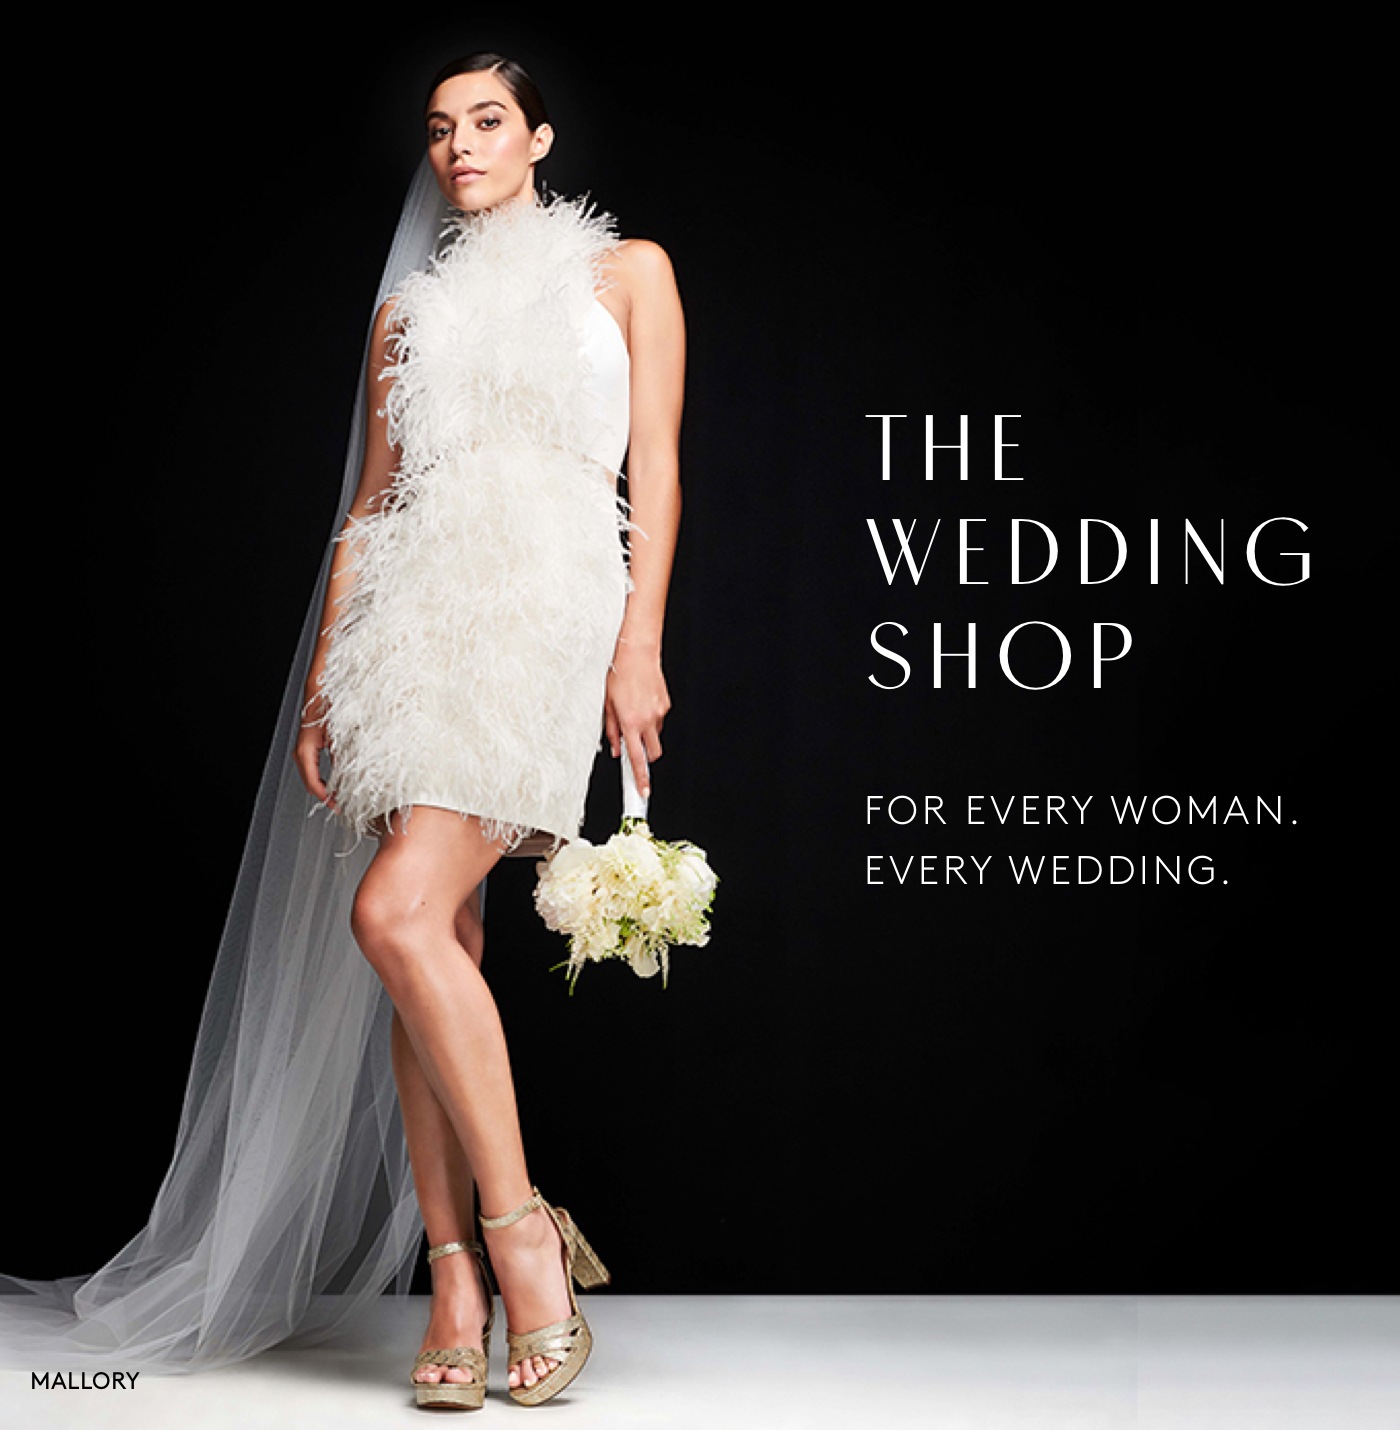 The Wedding Shop - For every woman. Every wedding.